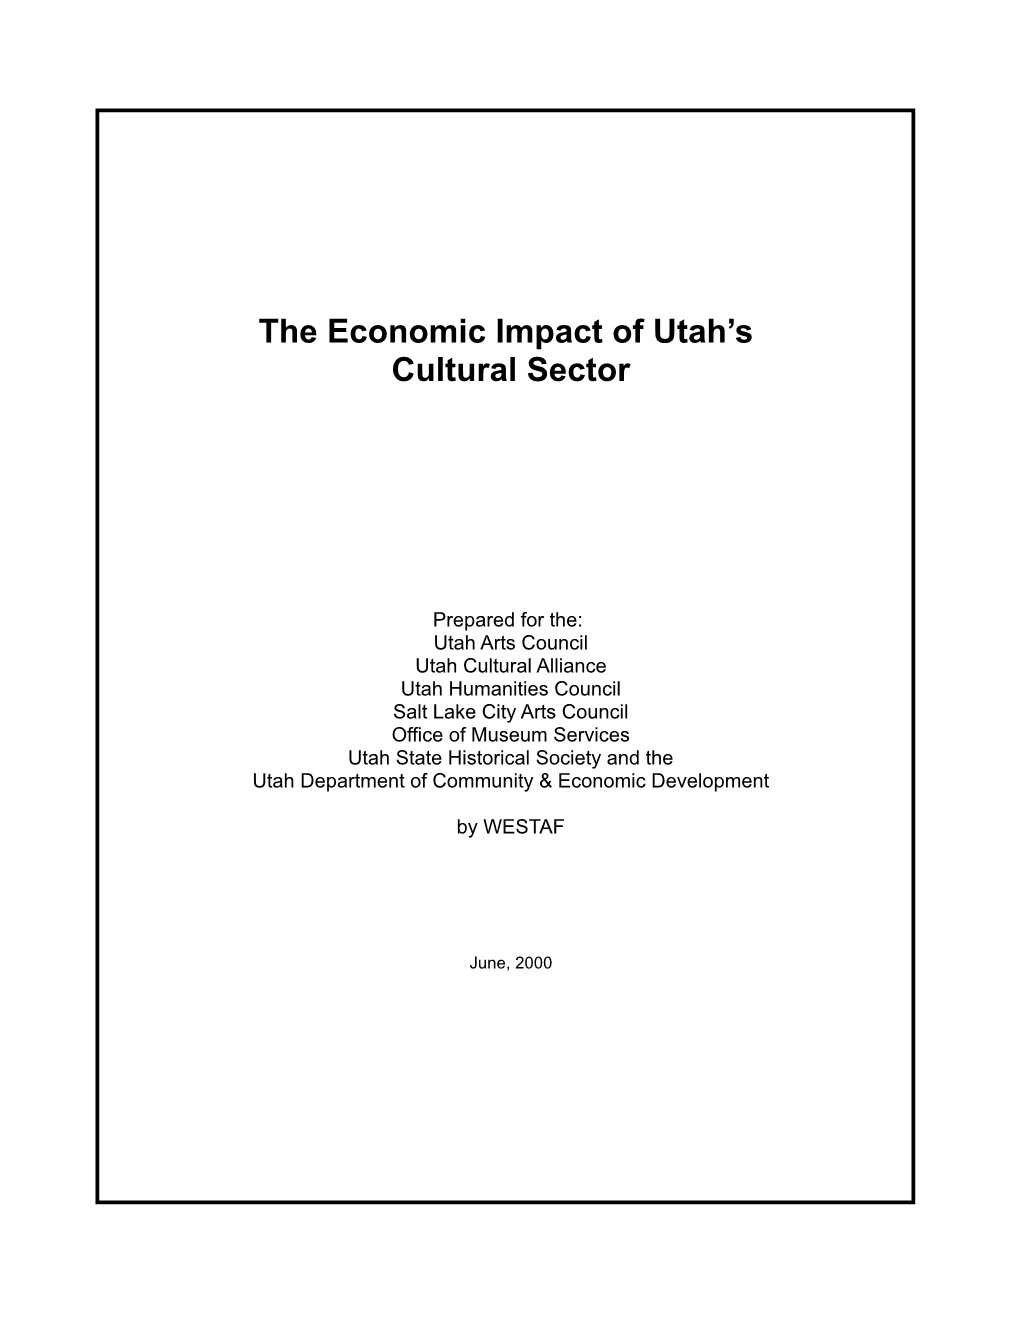 Utah Demographics and Social and Economic Issues in the State